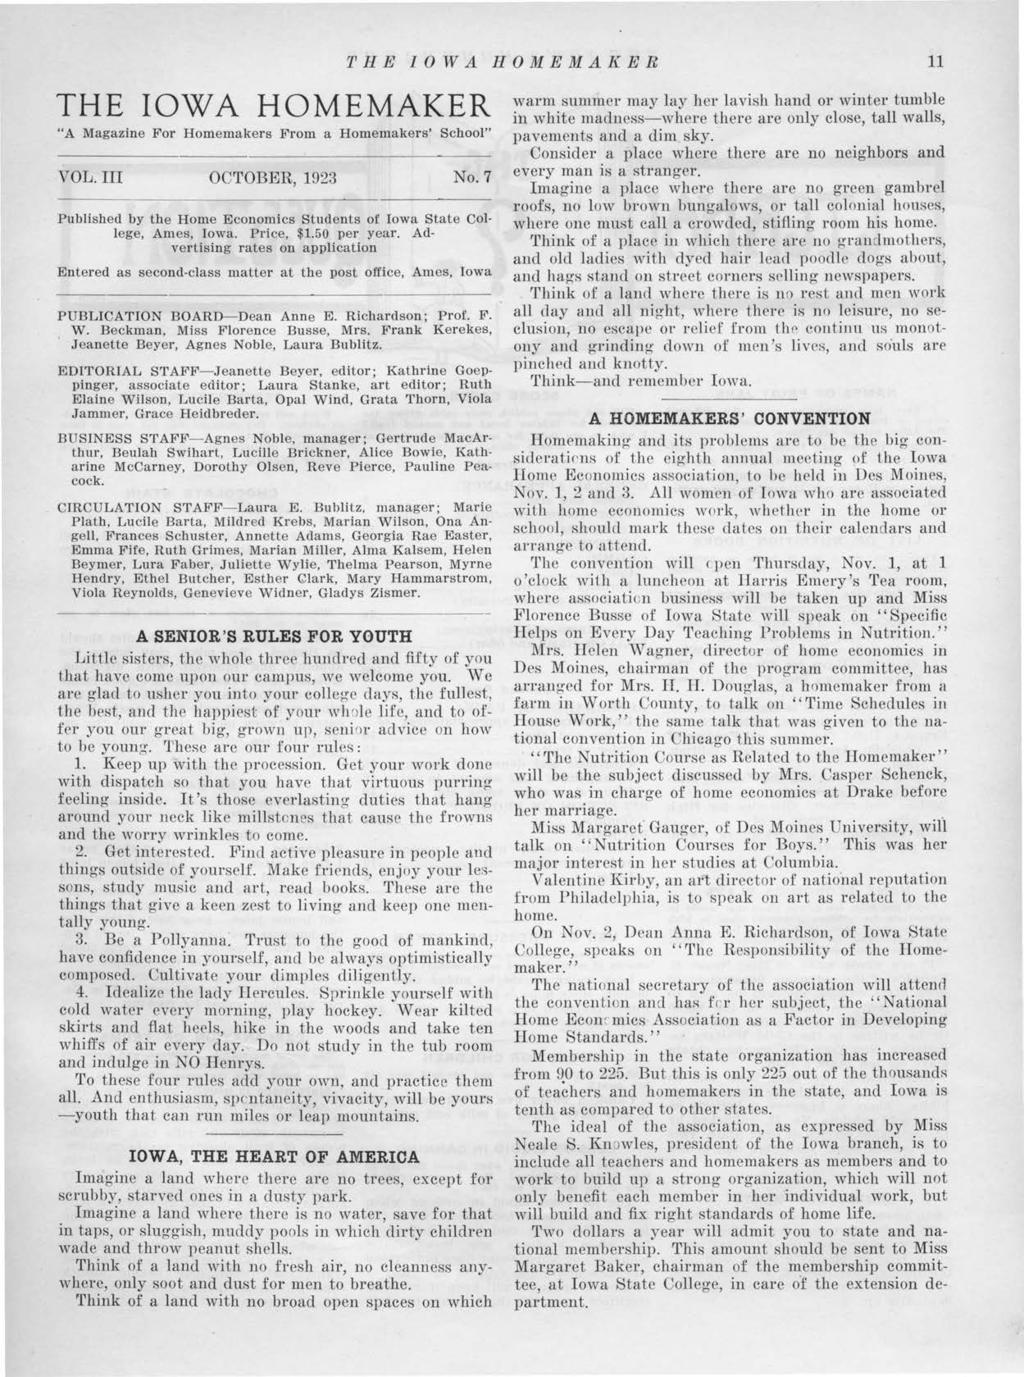 THE OWA HOMEMAKER "A Magazne For Homemakers From a Homemakers' School" VOL. OCTOBER, 1923 No. 7 Publshed by the Home Economcs Students of owa State College, Ames, owa. Prce, $1.50 per year.